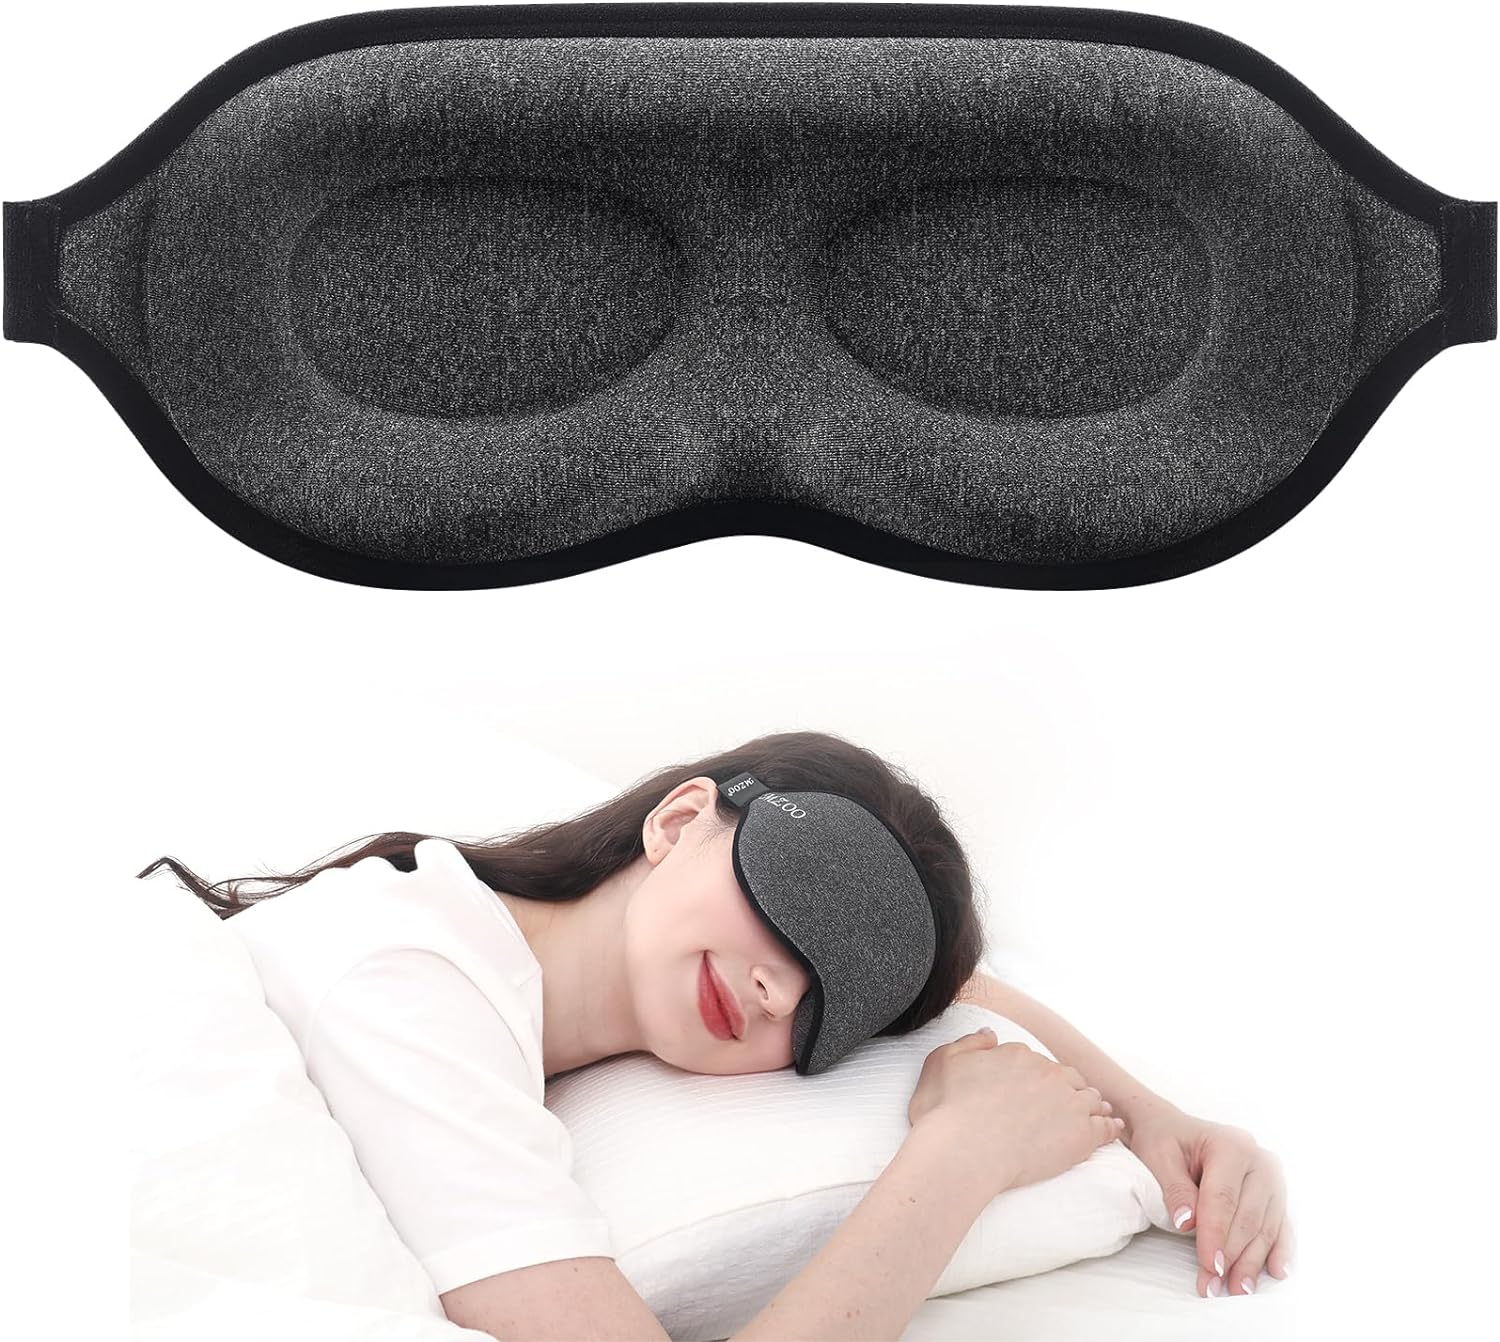 The MZOO Sleep Eye Mask has quickly become an indispensable part of my nighttime routine, transforming my sleep quality and overall restfulness. This 3D contoured cup sleeping mask is not just any ordinary eye mask; it' a sleep-enhancing masterpiece. Here' why I'm thrilled with the MZOO Sleep Eye Mask:1. Innovative 3D Design: The 3D contoured cup design of this eye mask is a game-changer. Unlike flat masks that can press against your eyes and eyelashes, the MZOO mask fits snugly without any di